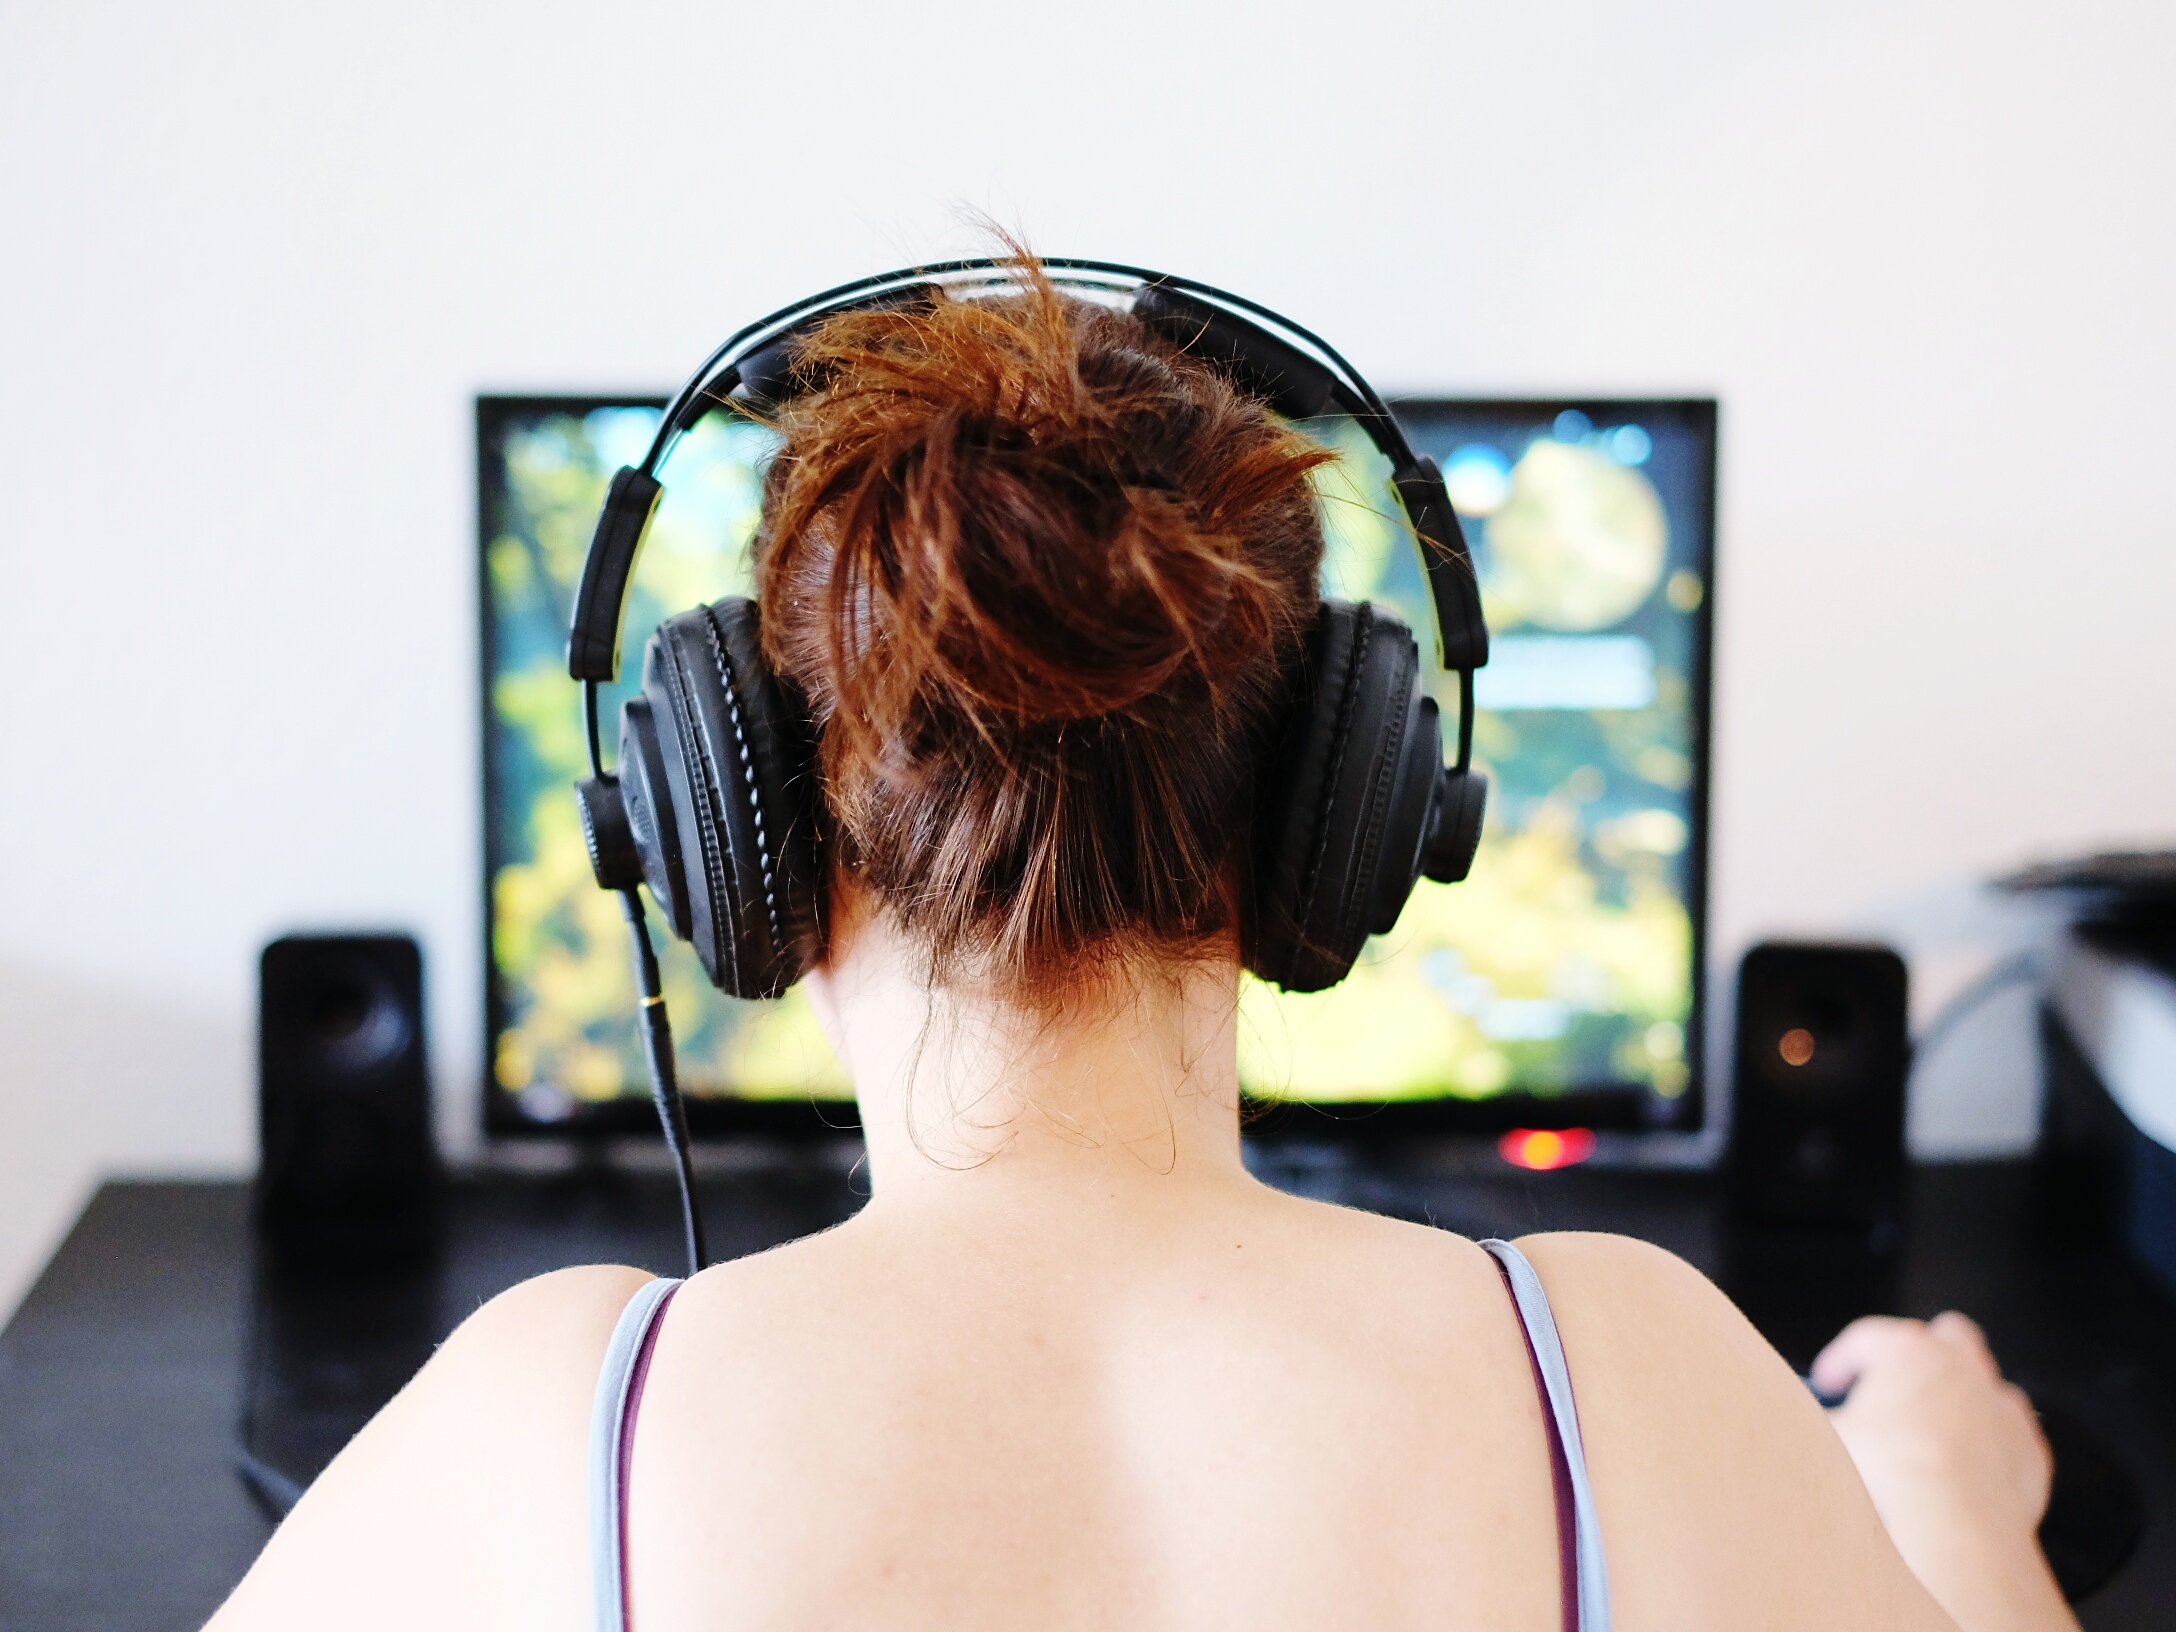 Gamers on : Evolving Video Consumption